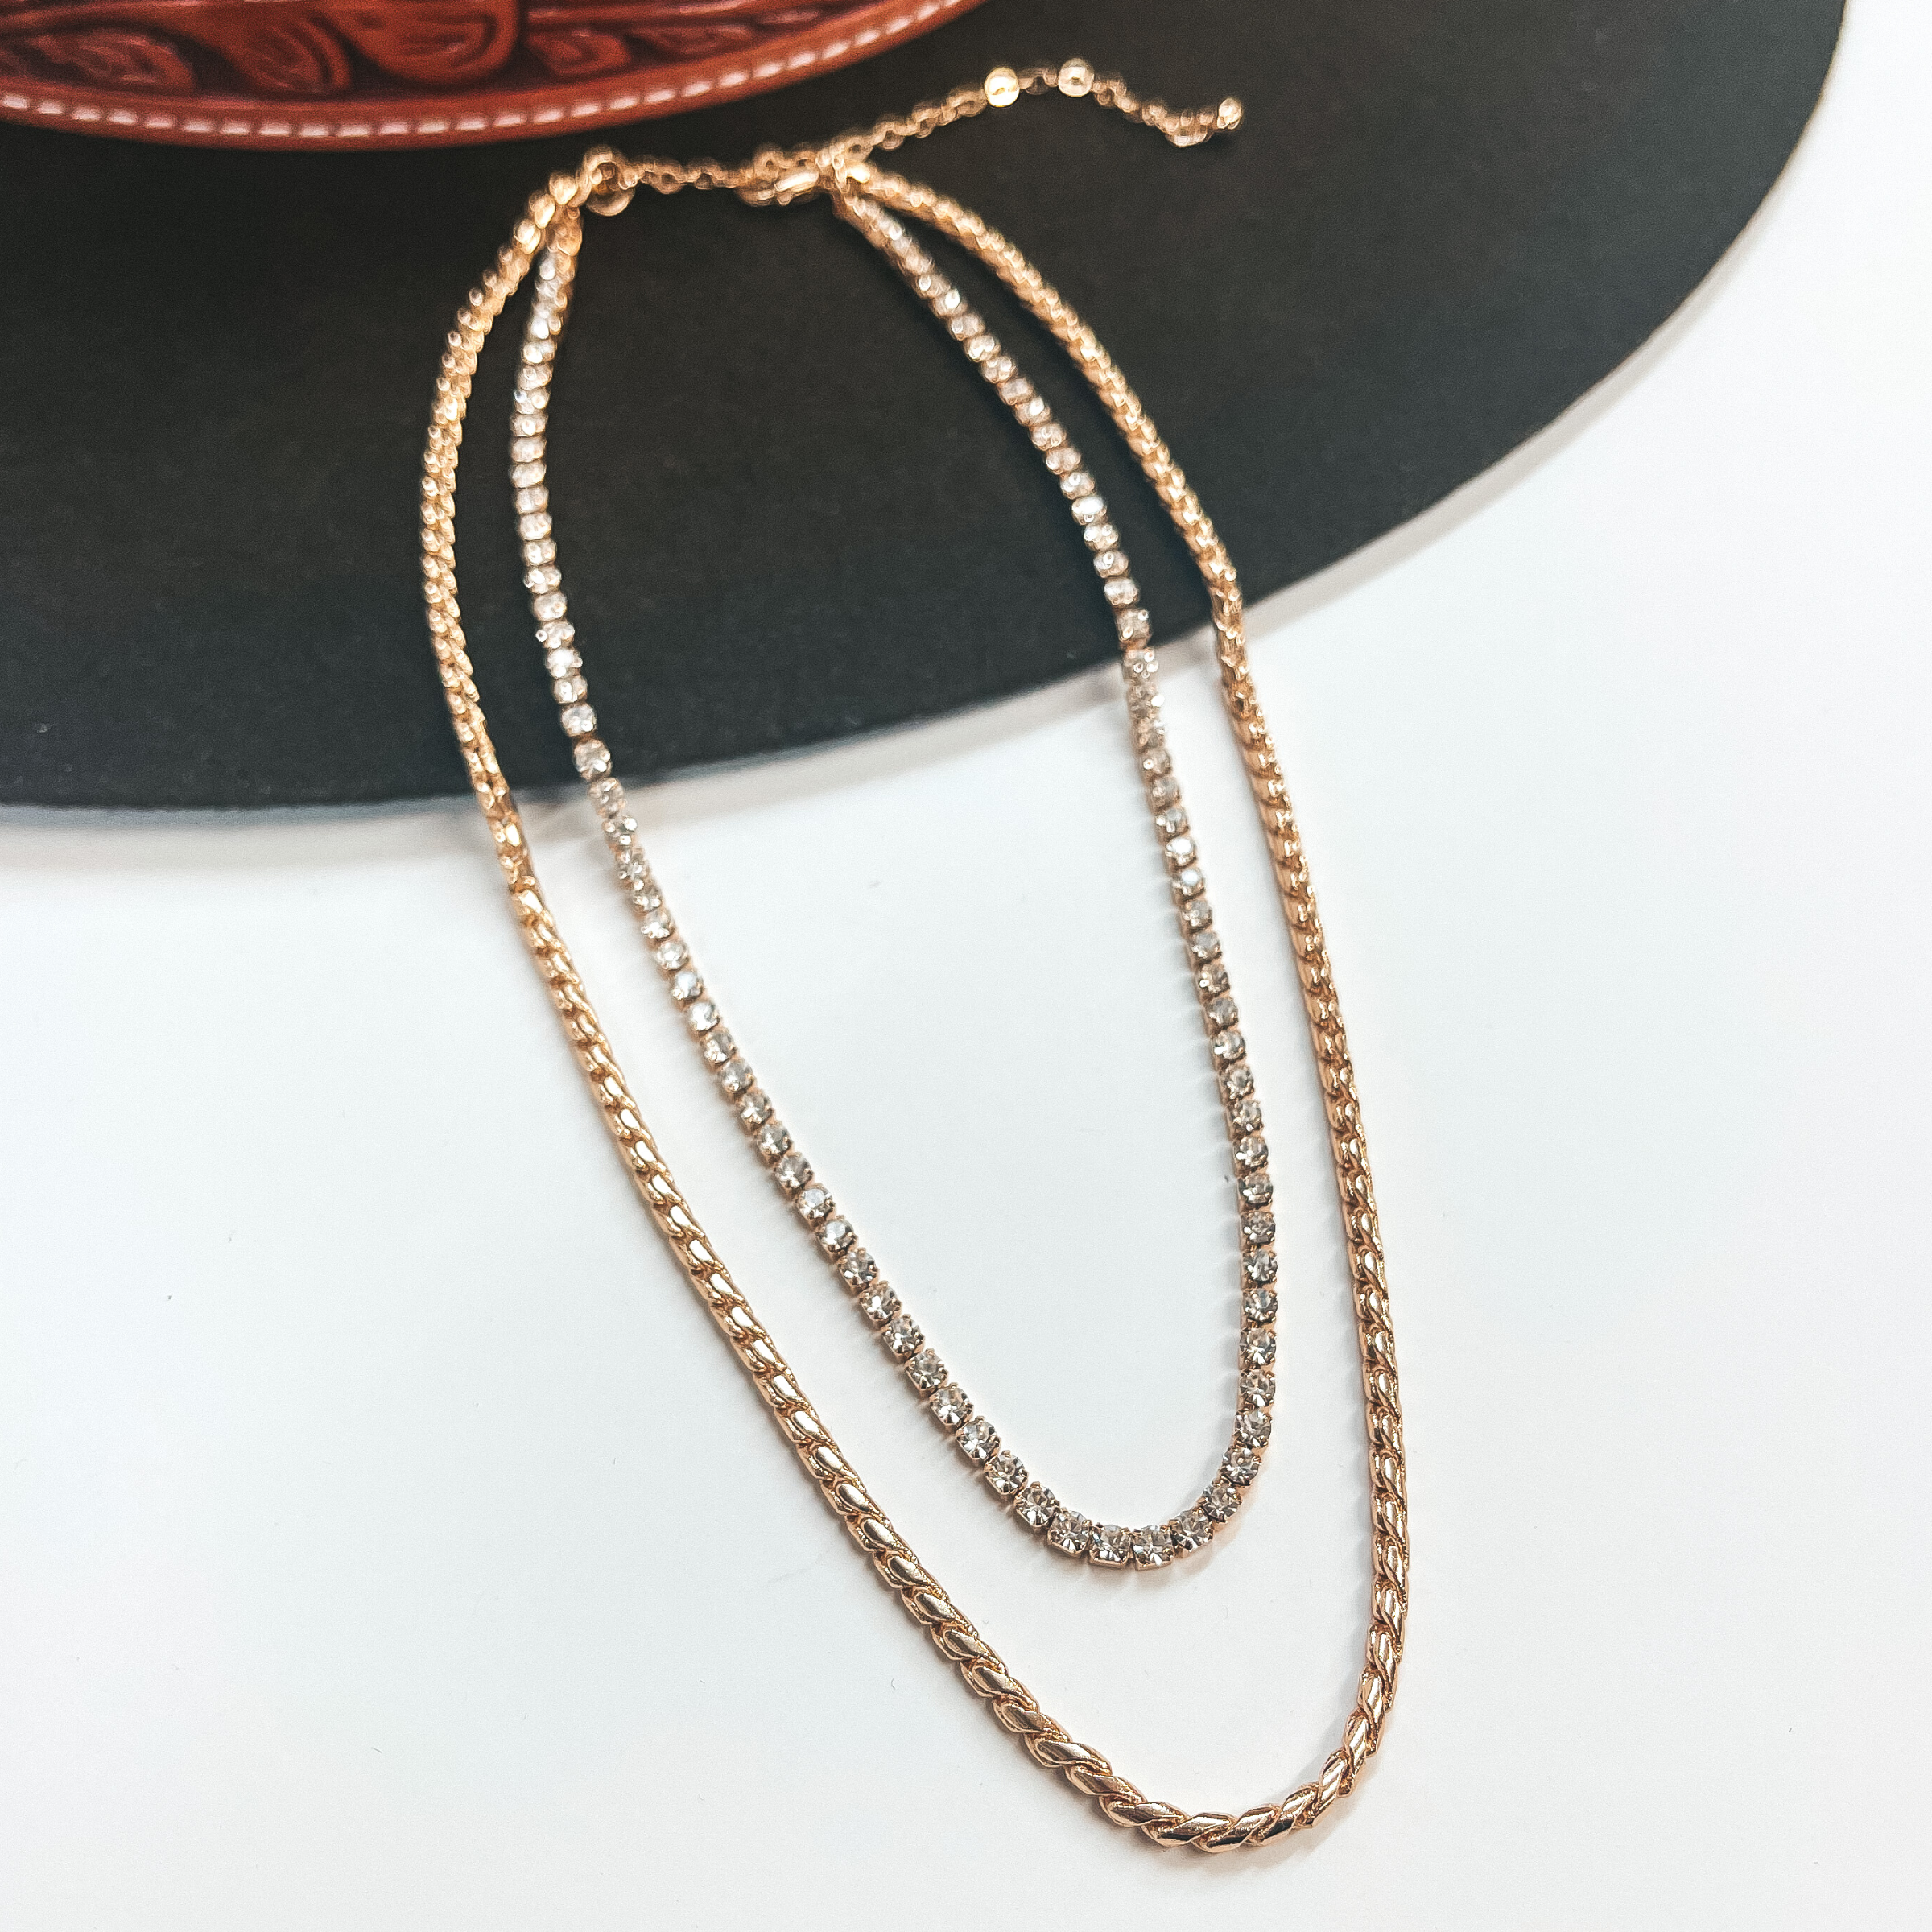 This is double layered gold chain necklace, the longer  chain is a braid textured chain. The smallest chain  has rhinestones all around. This necklace is pictured  laying on a dark brown hat and white background.